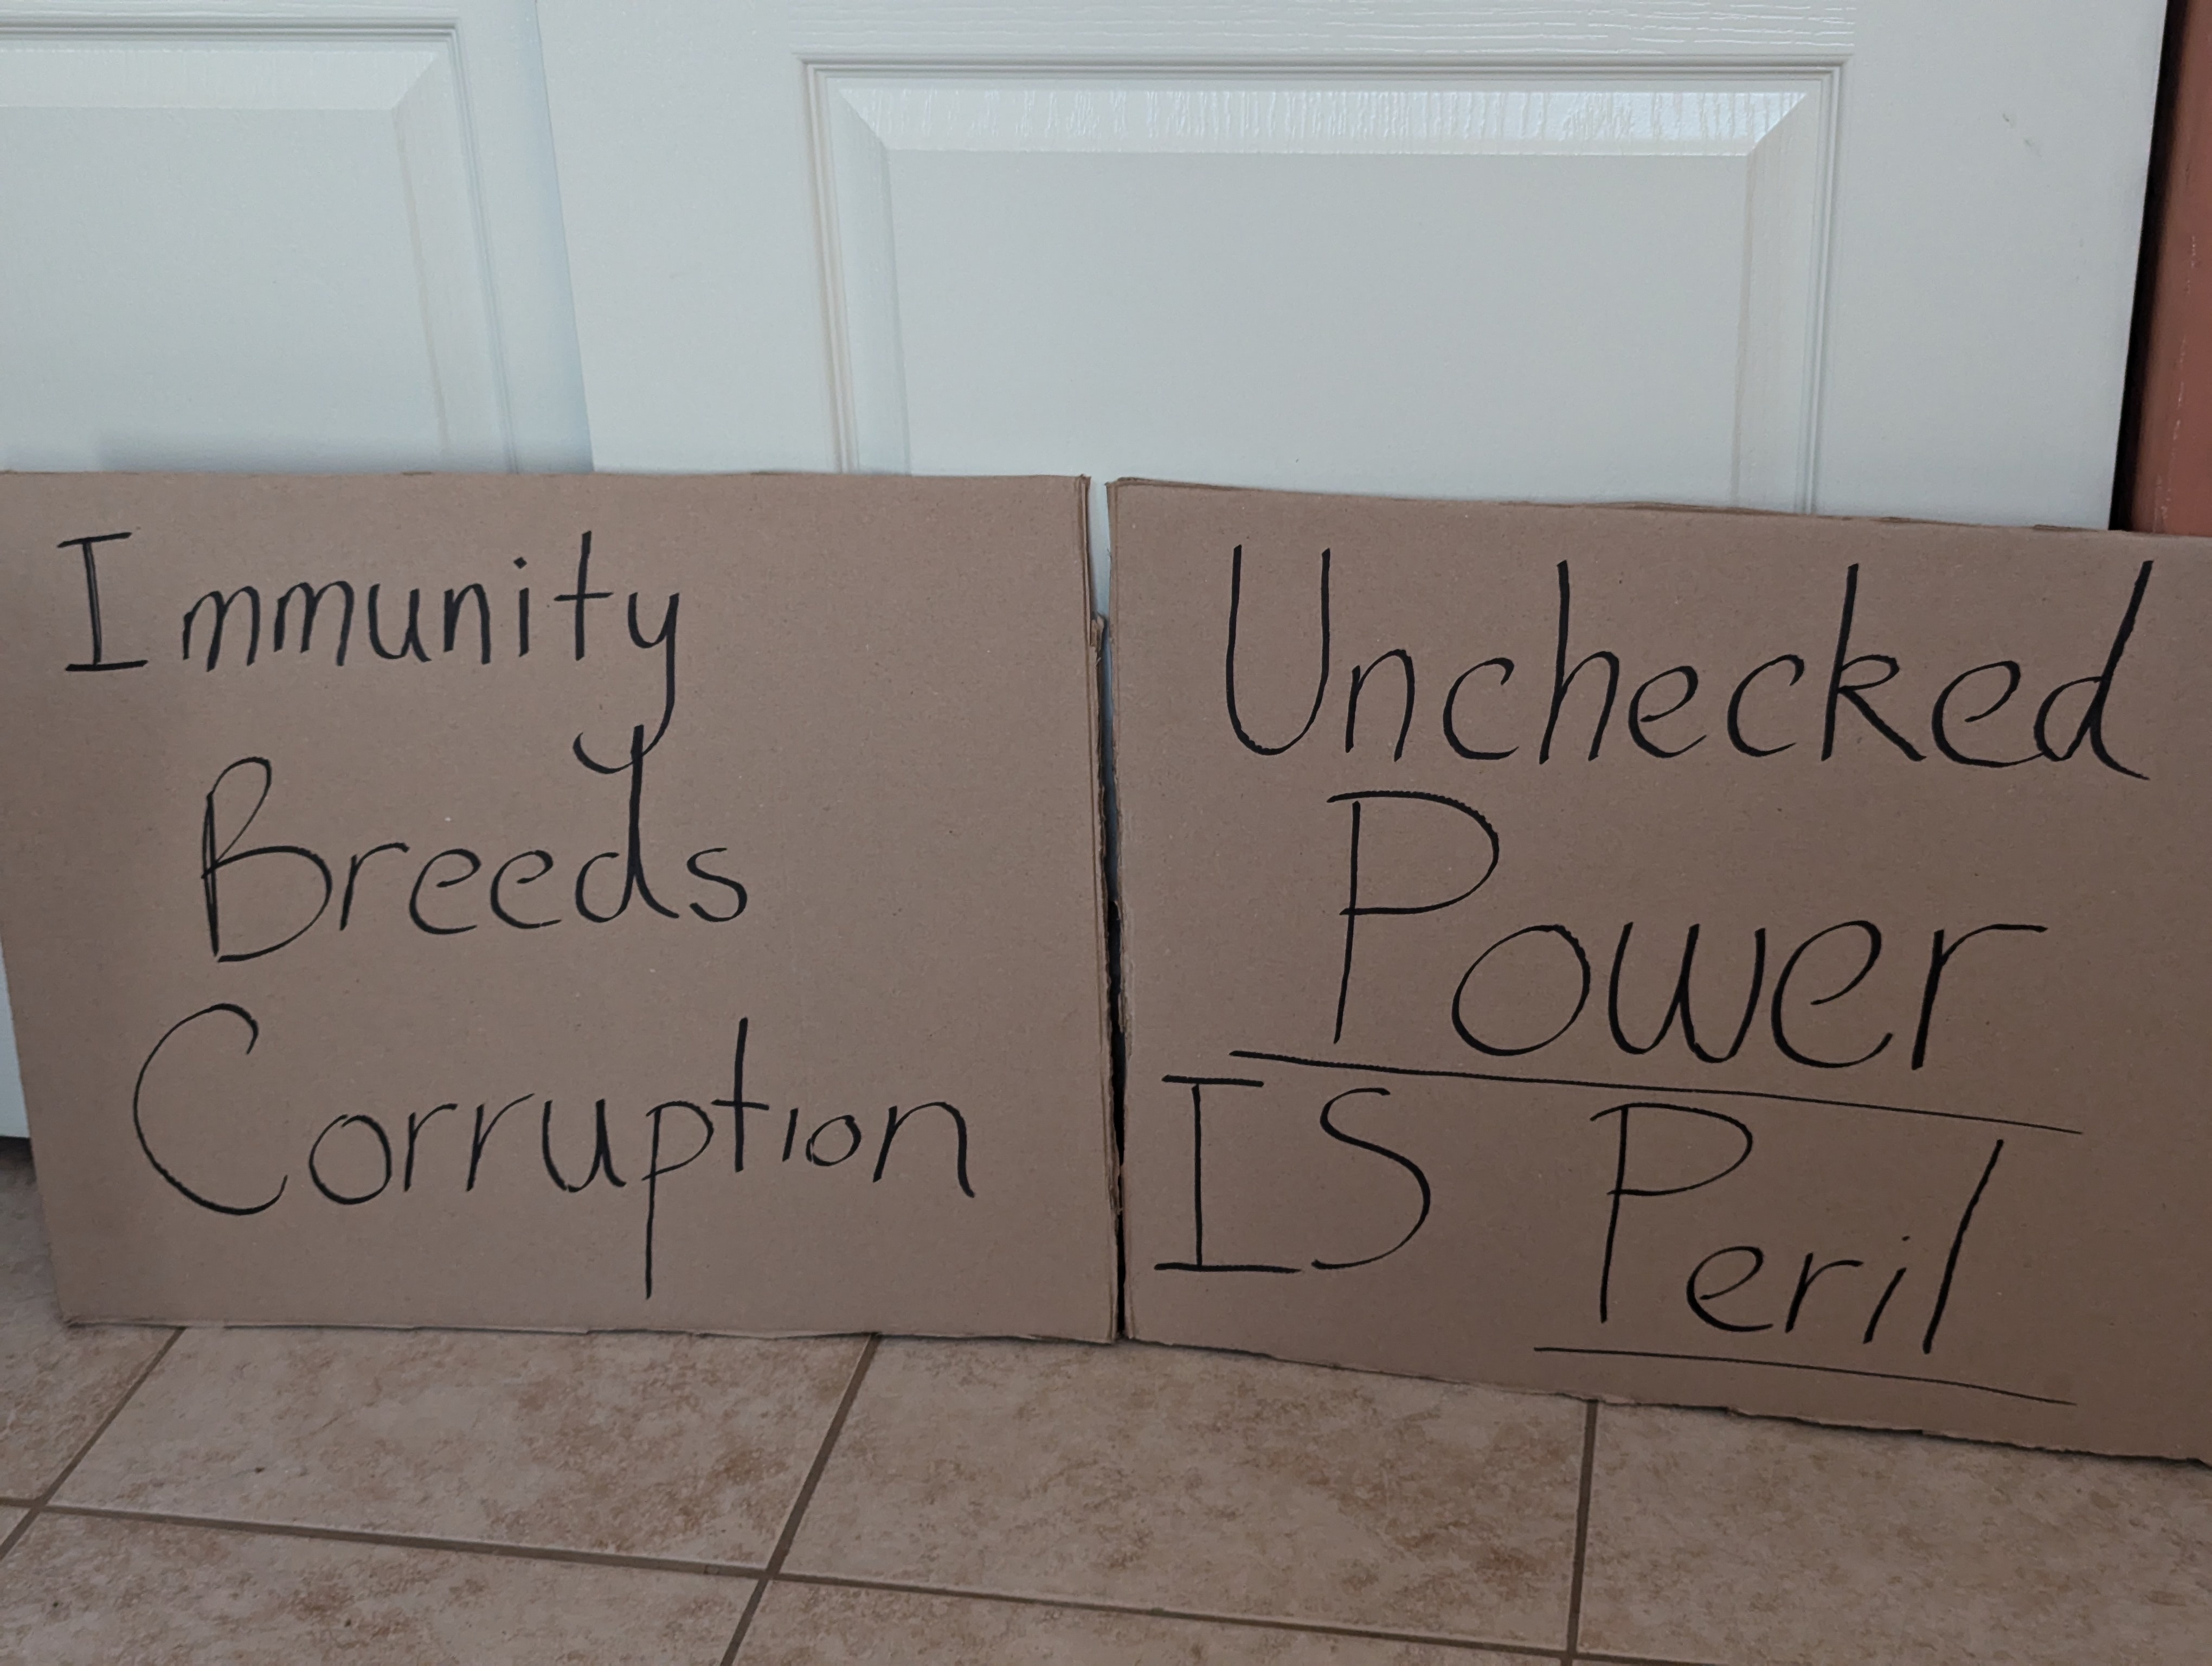 Protest signs, one says "Immunity Breeds Corruption" and another says "Unchecked Power is Peril"